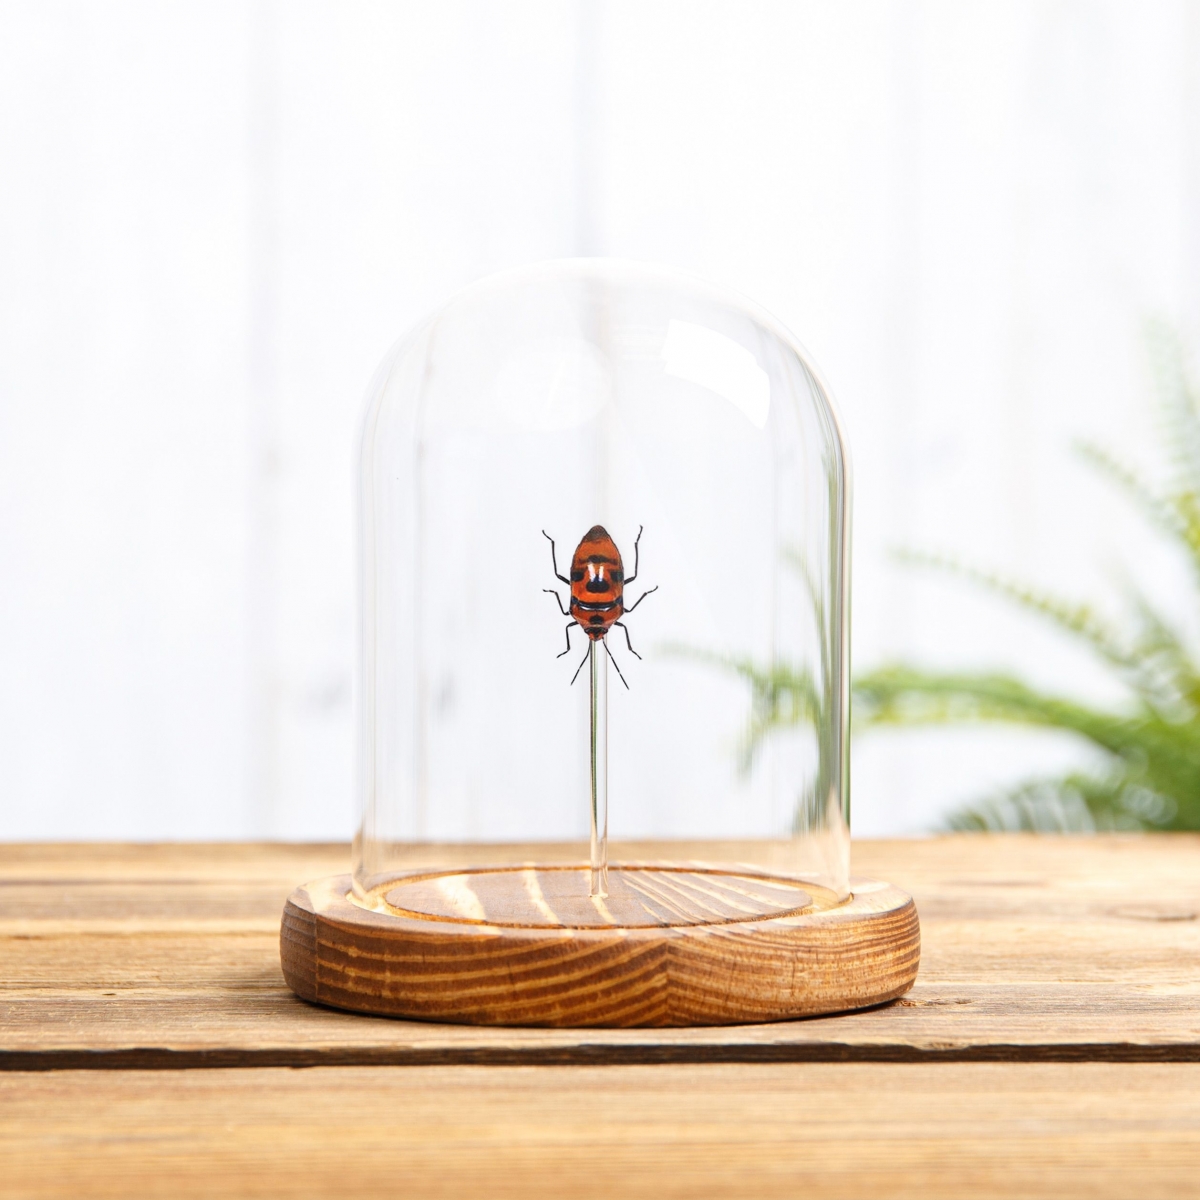 Clown Face Bug in Glass Dome with Wooden Base (Eucorysses javanus)